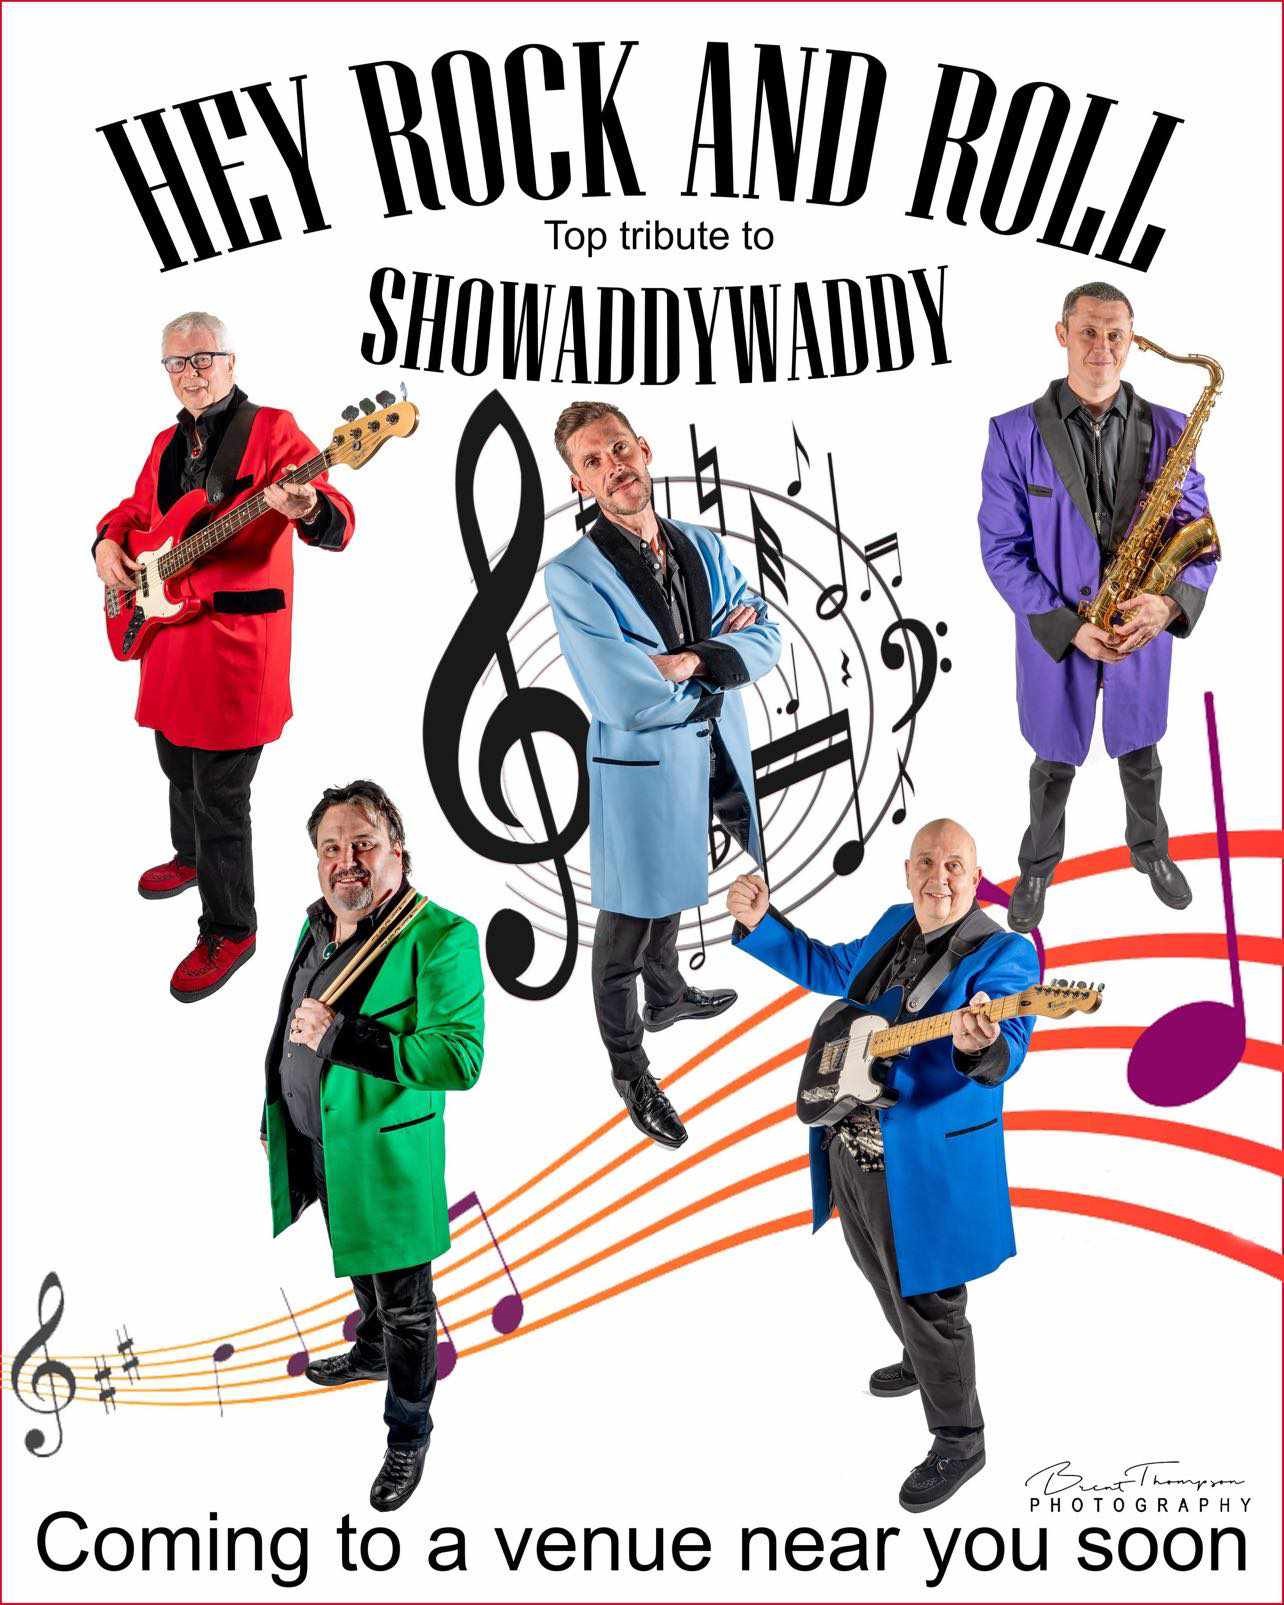 A Night of Showaddywaddy and top rock and roll and the brilliant Simon Lee  on Jan 25, 19:30@Childers Sports and Social Club - Buy tickets and Get information on whittlesey music nights 